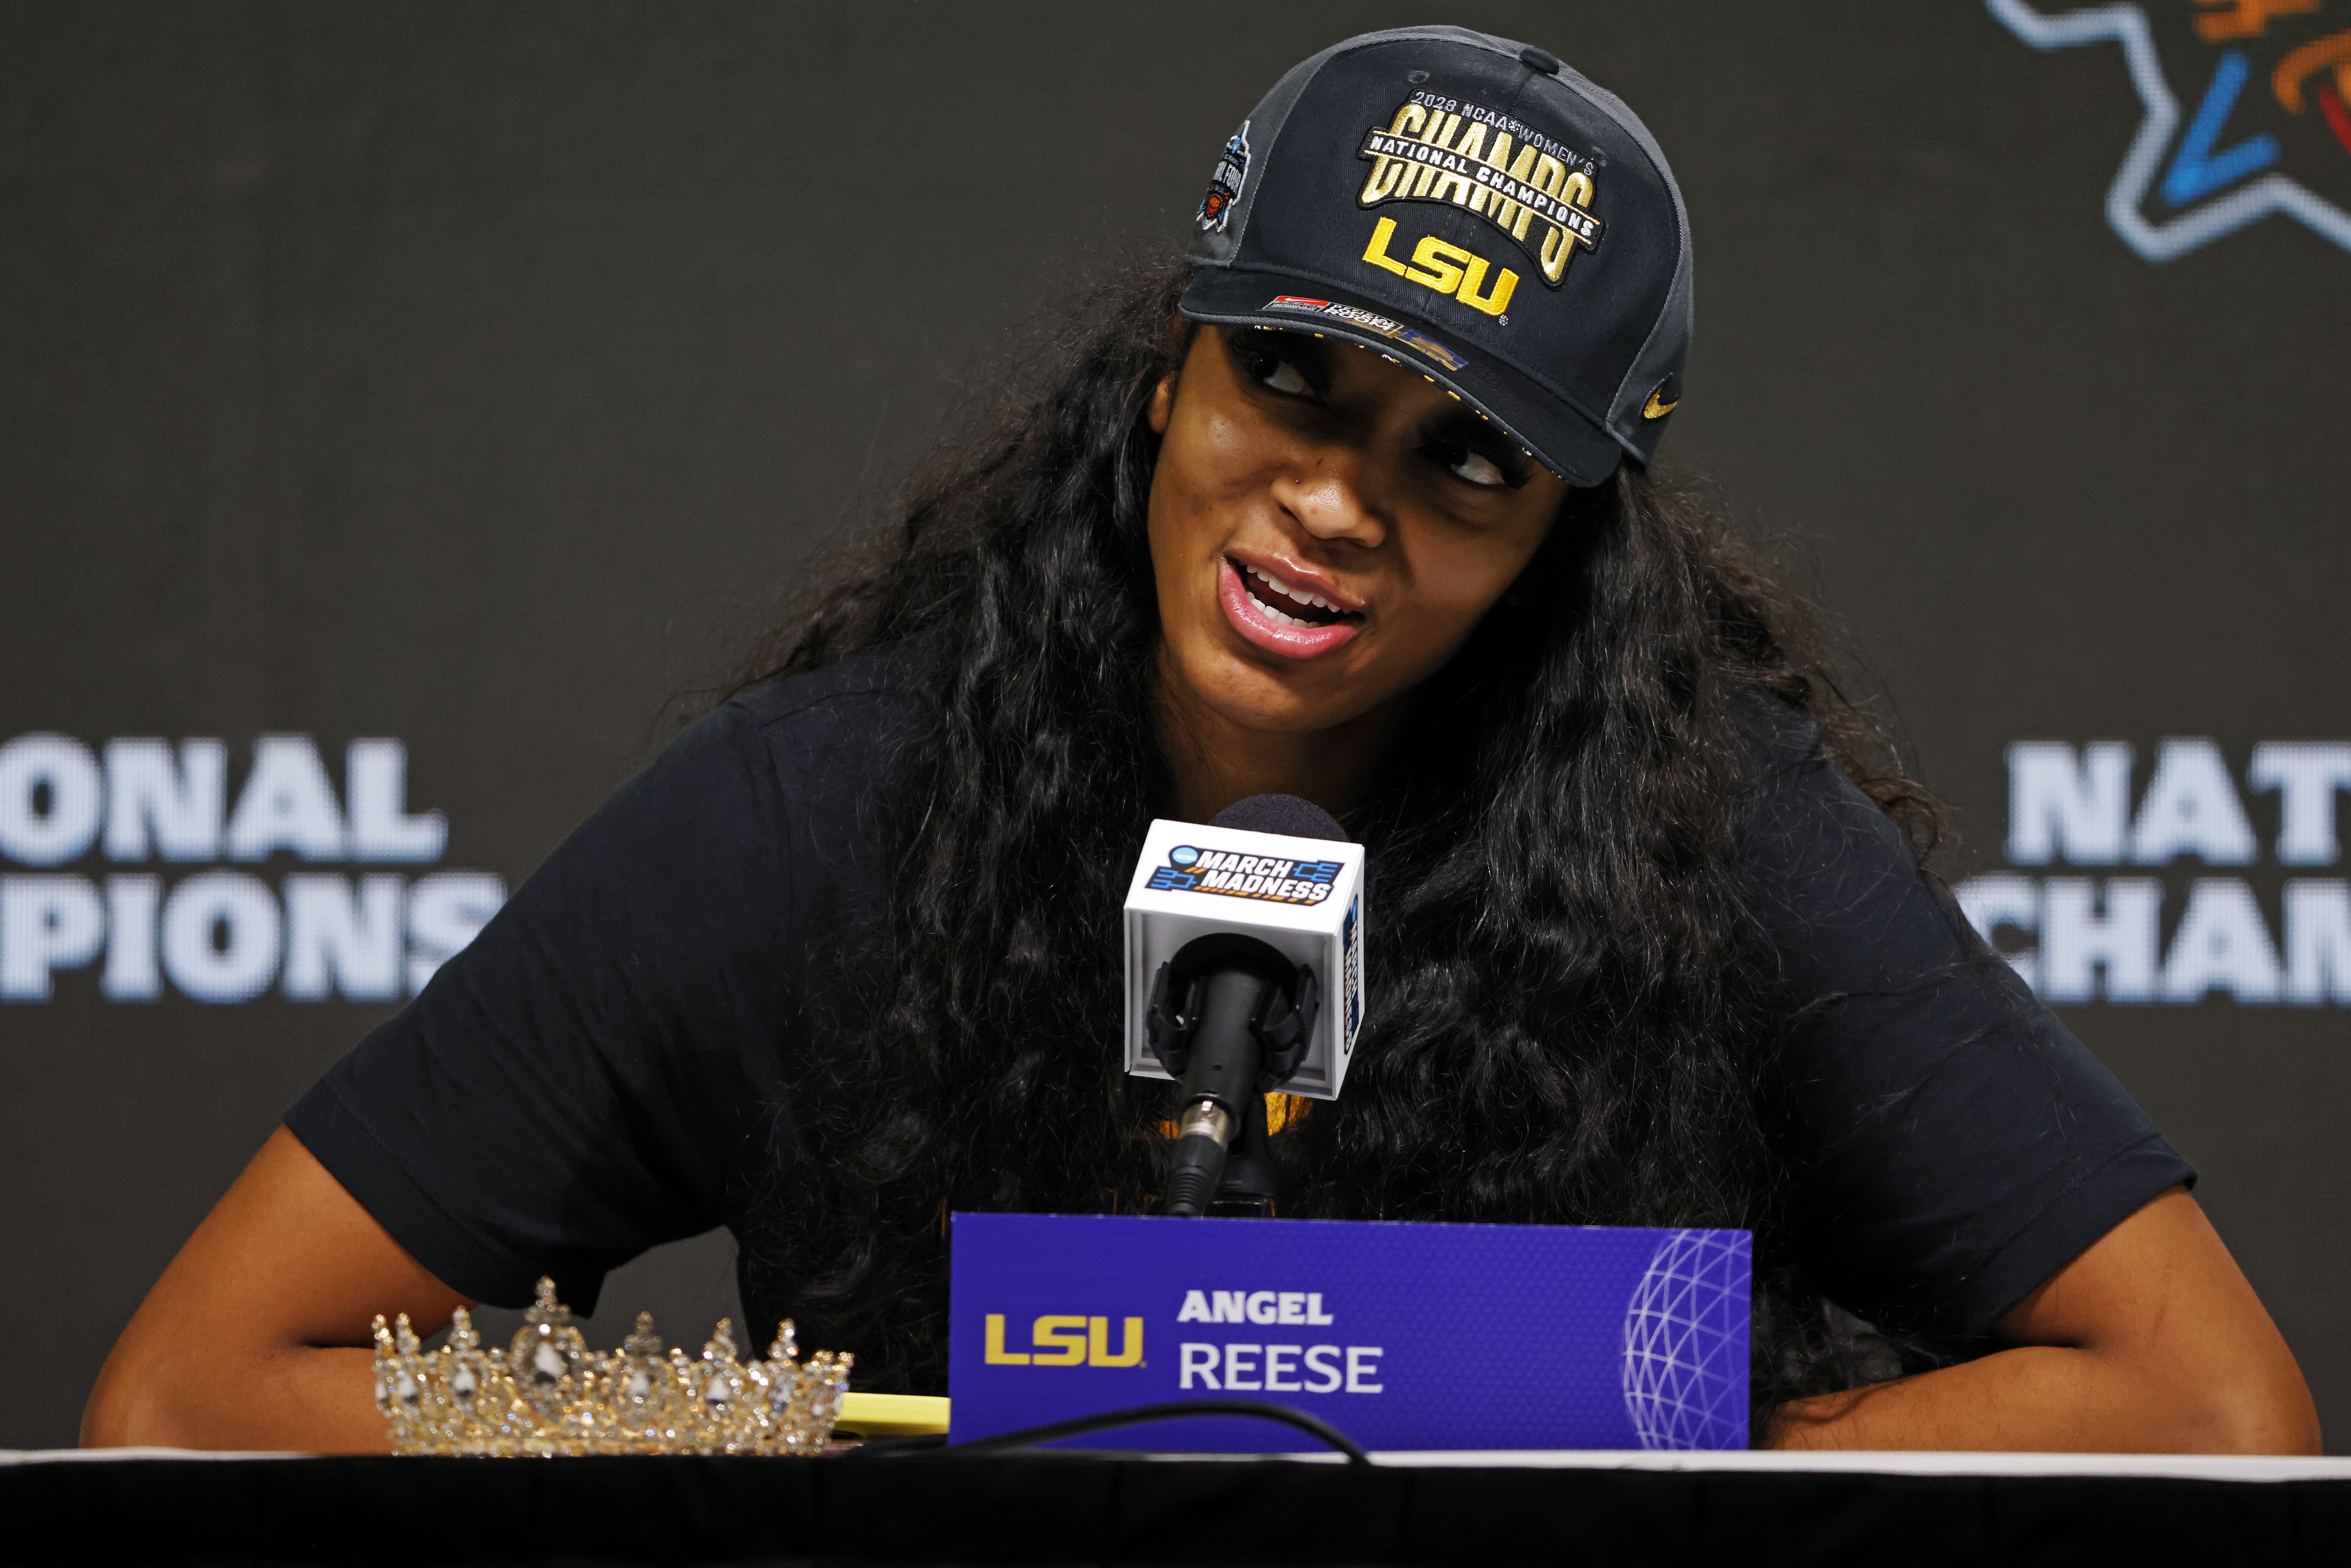 Shaq calls Angel Reese ‘the greatest athlete to ever come out of LSU’